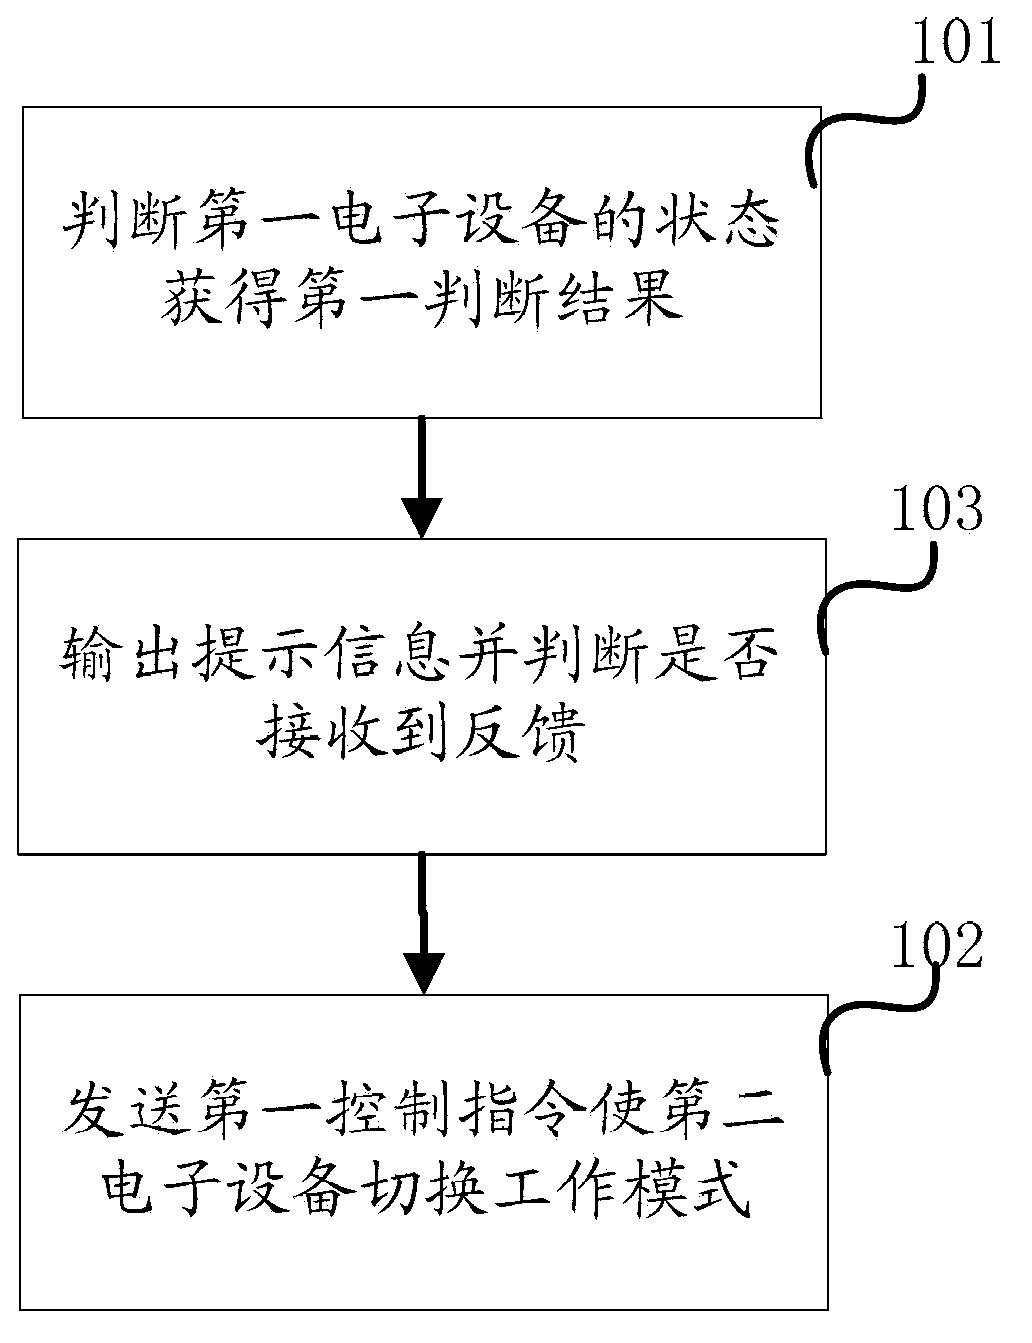 Operating state control method and device